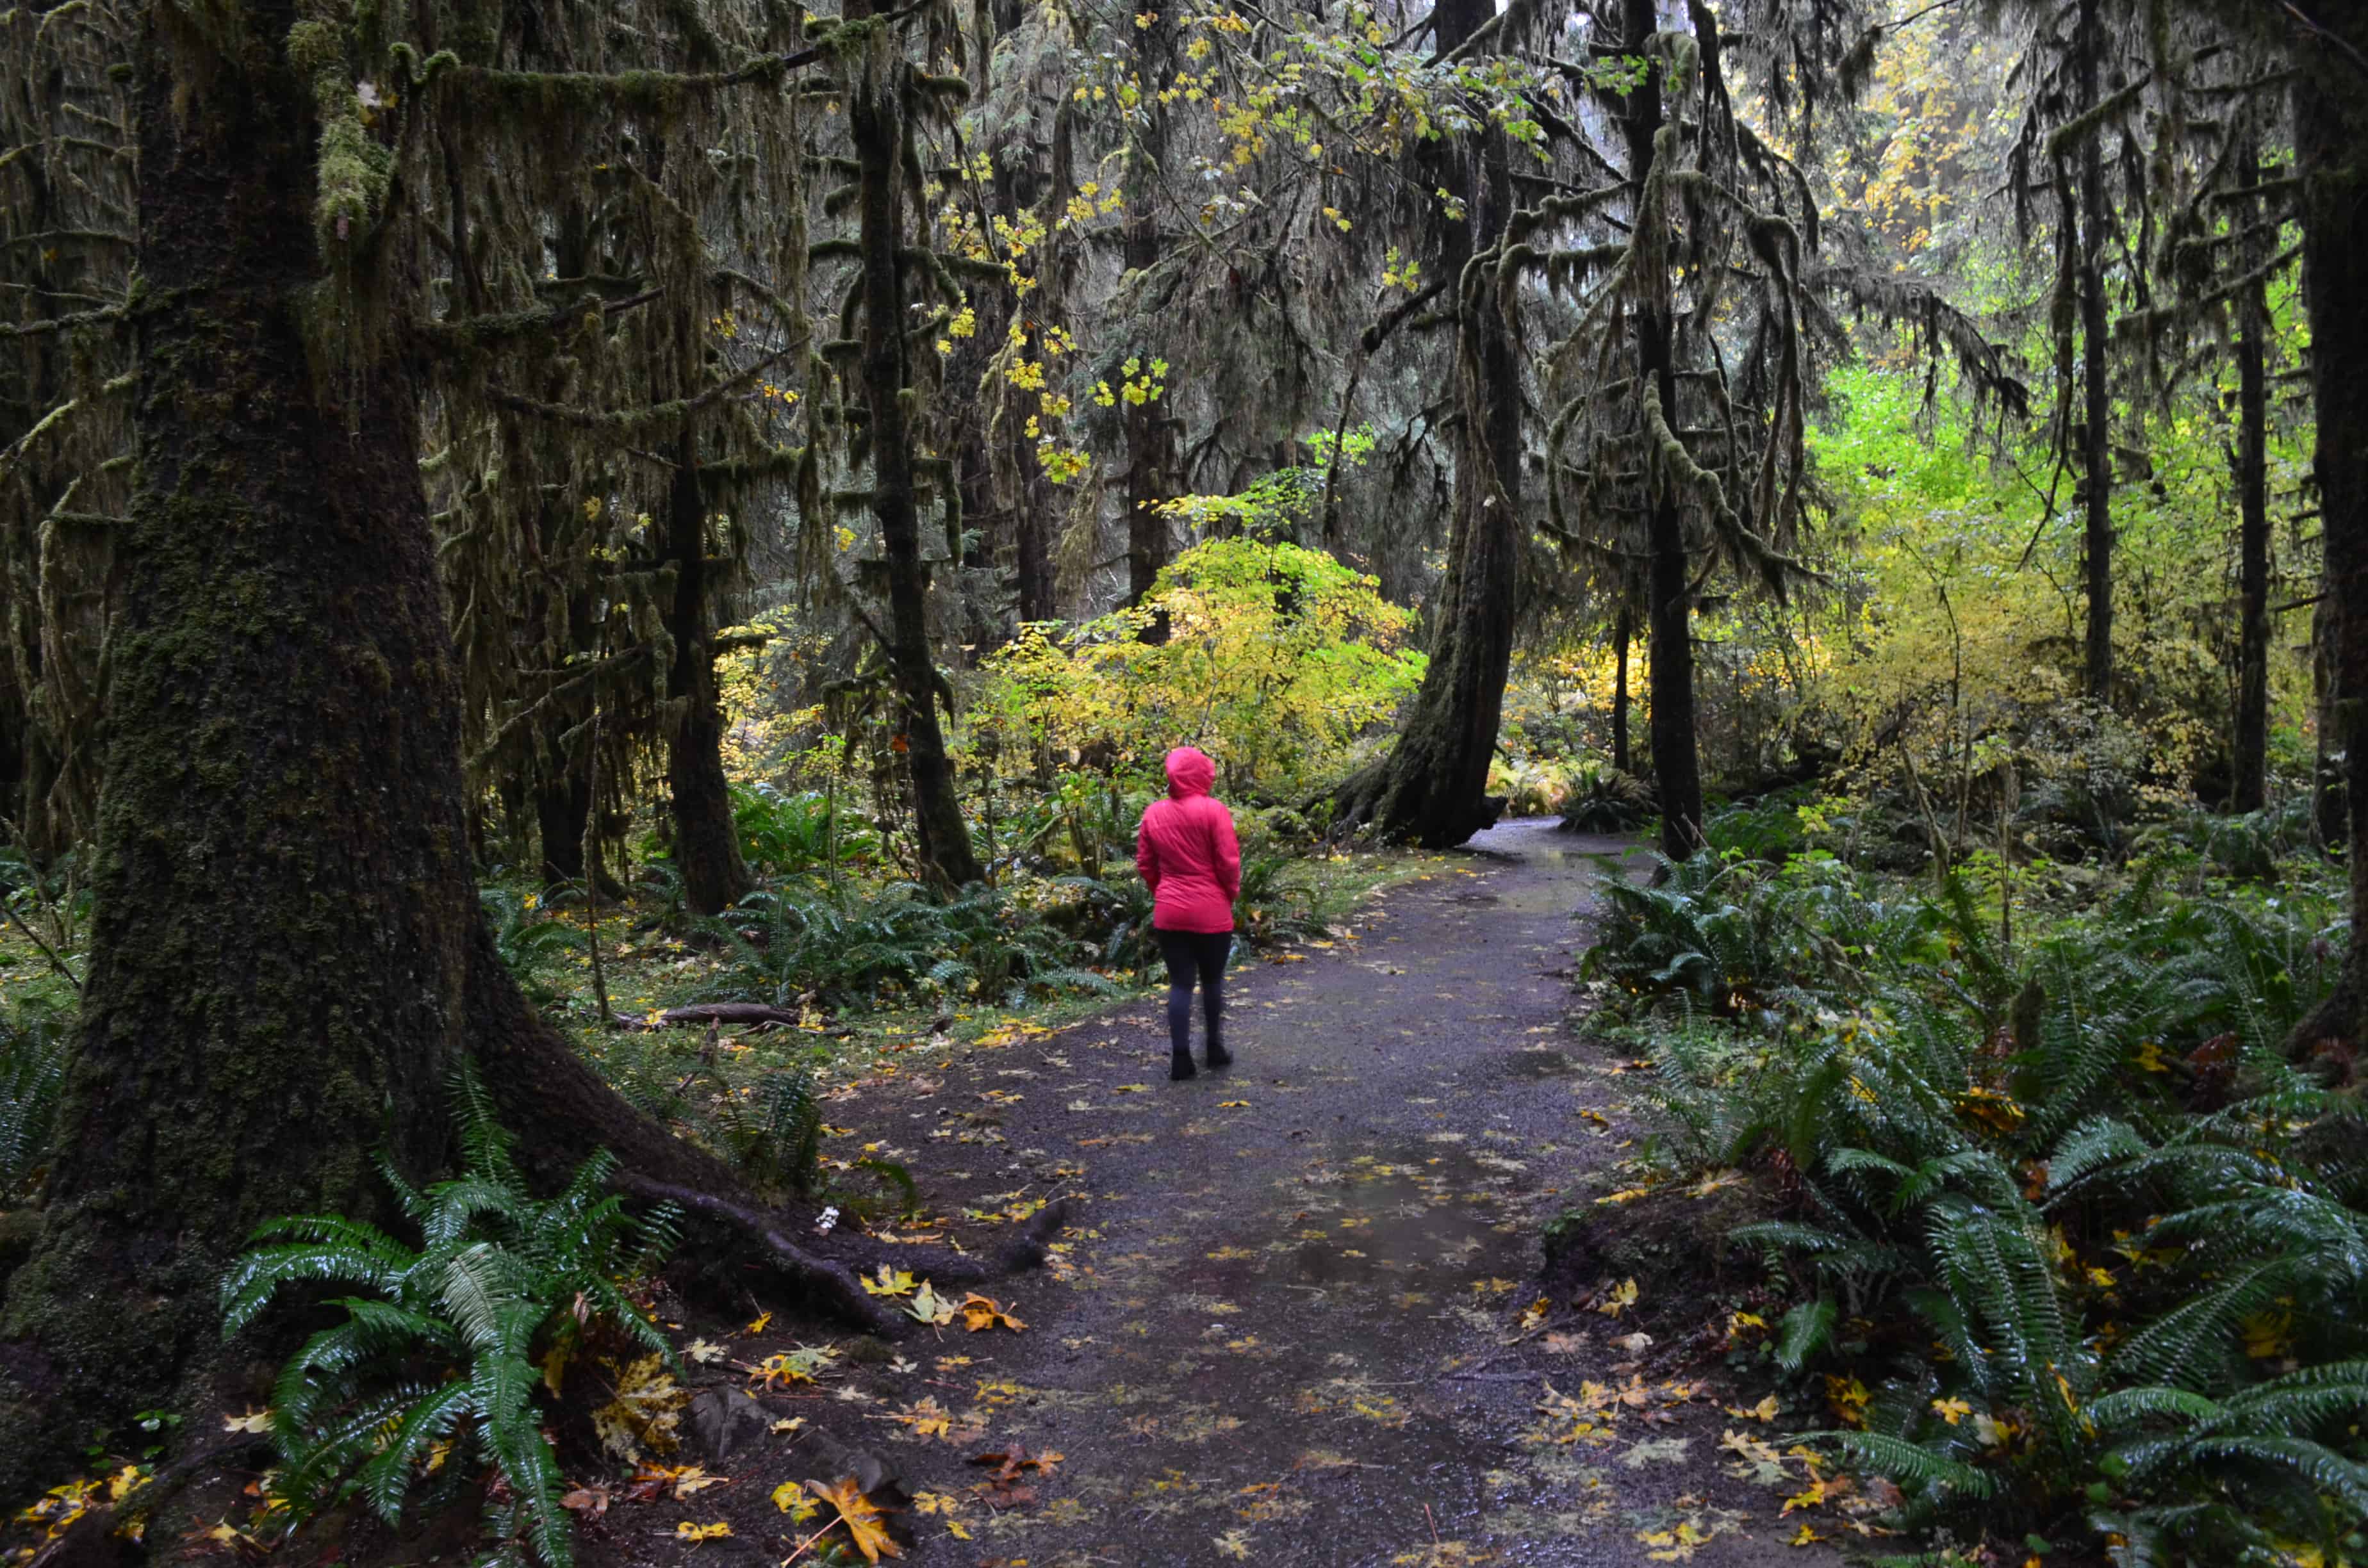 Walking through the Hoh Rain Forest at Olympic National Park in Washington